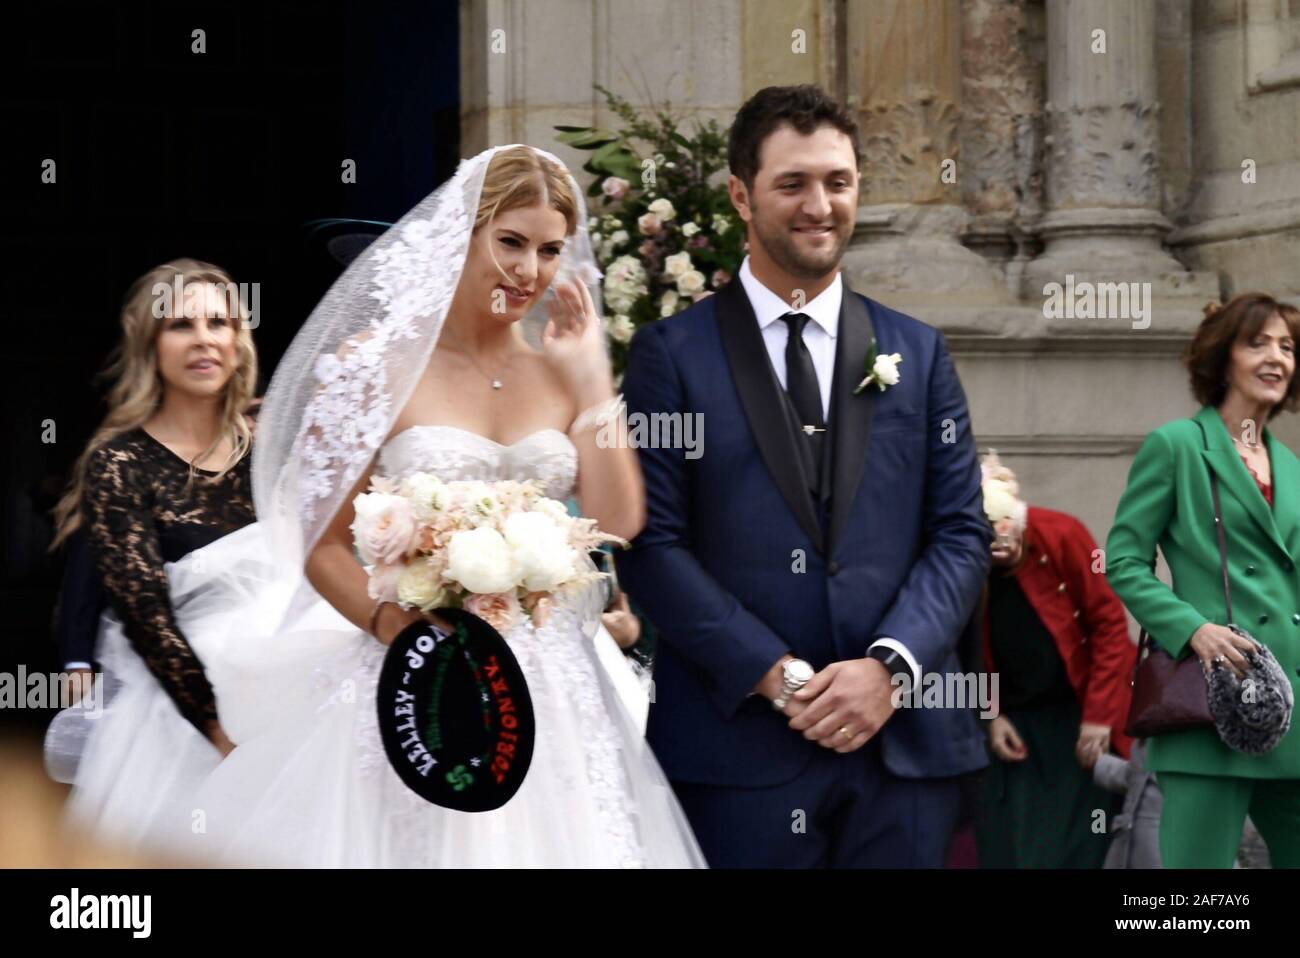 Bilbao, Spain. 13th Dec, 2019. Wedding of golfer Jon Rahm and Kelley Cahill at the Basilica of Our Lady of Begoña in Bilbao, Friday December 13, 2019 Credit: CORDON PRESS/Alamy Live News Stock Photo